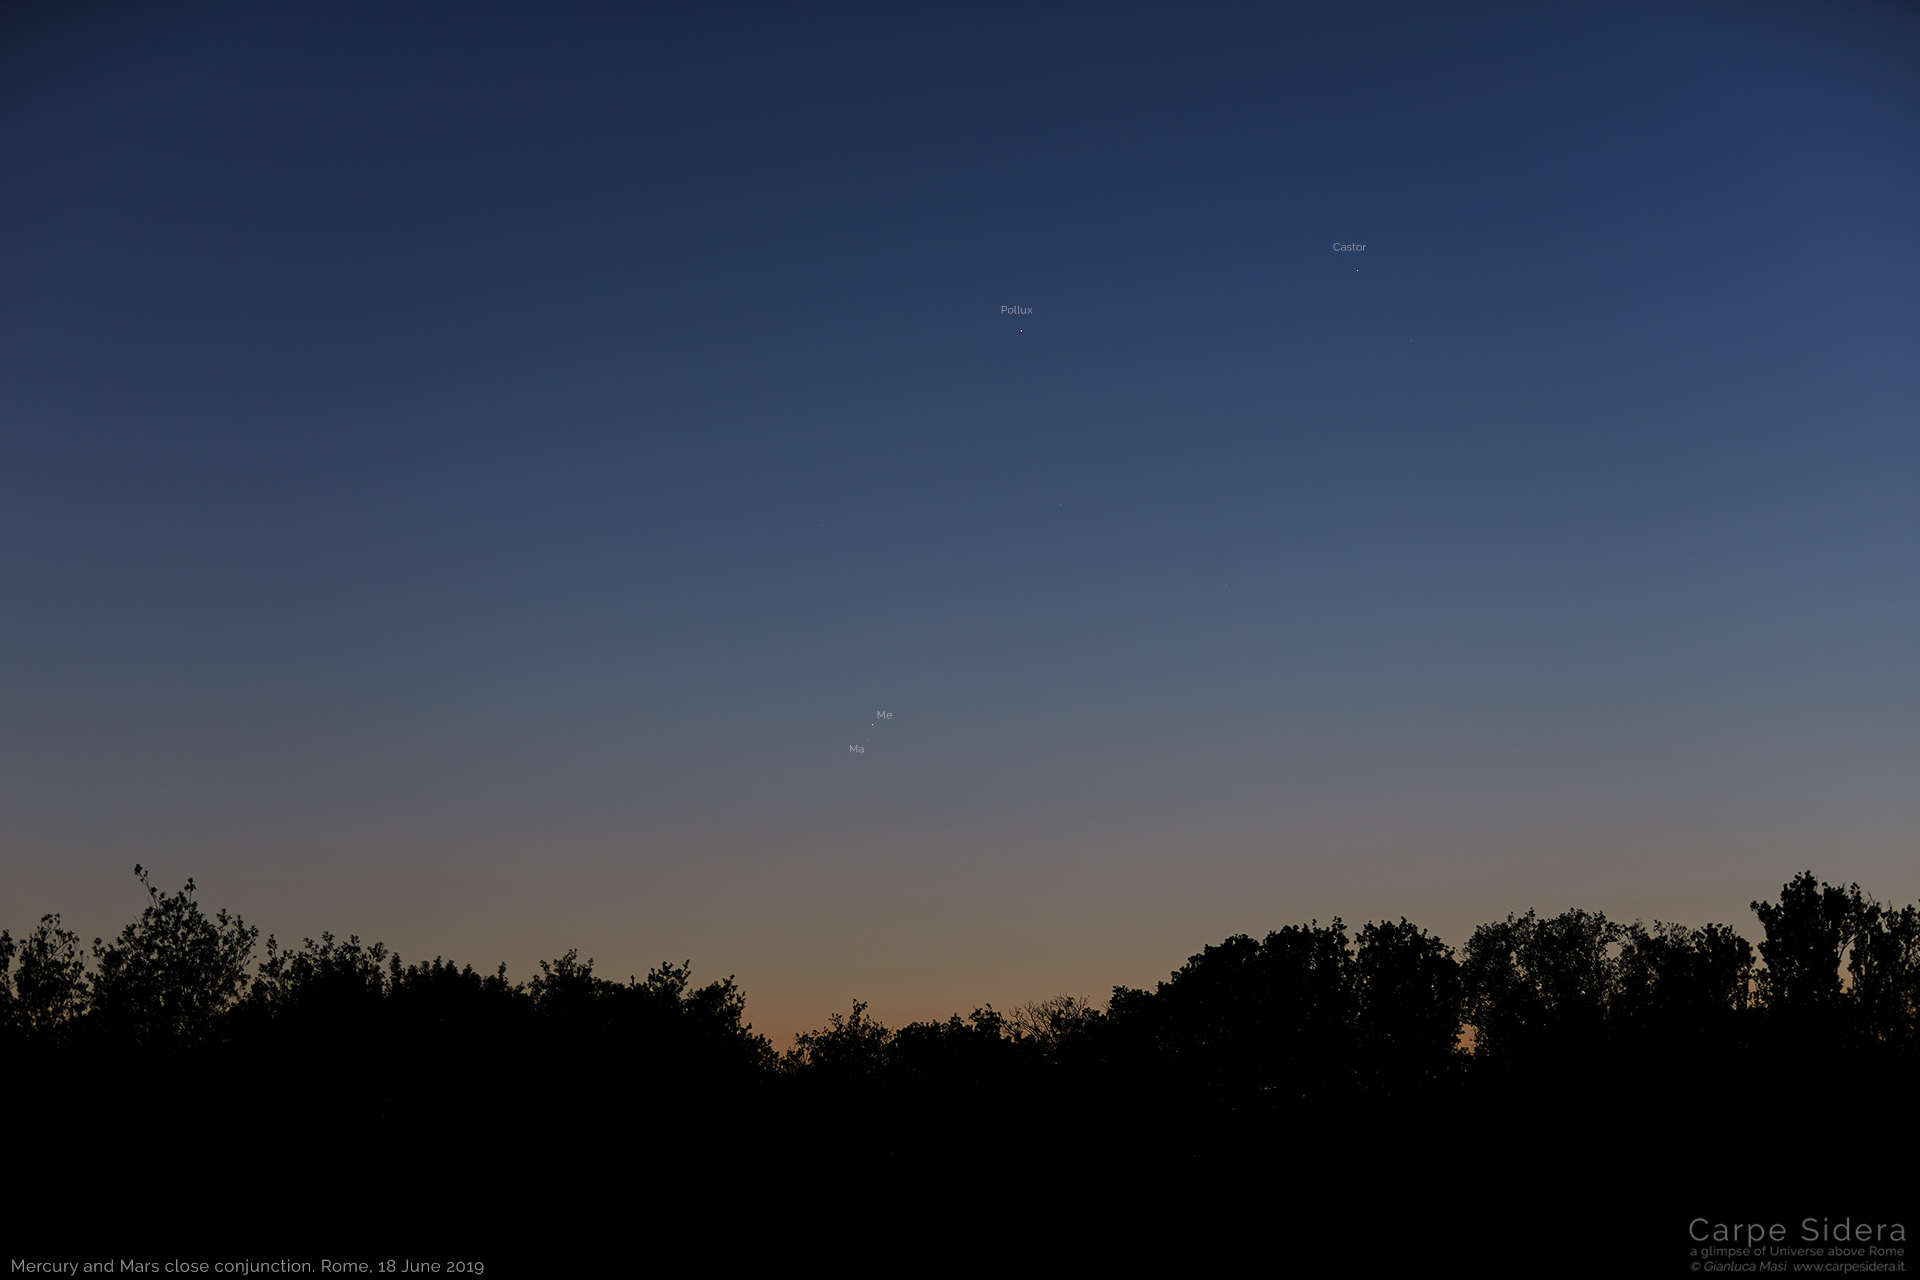 Mercury and Mars shine together with Castor and Pollux, the brightest stars in Gemini ("Twins") - 18 June 2019